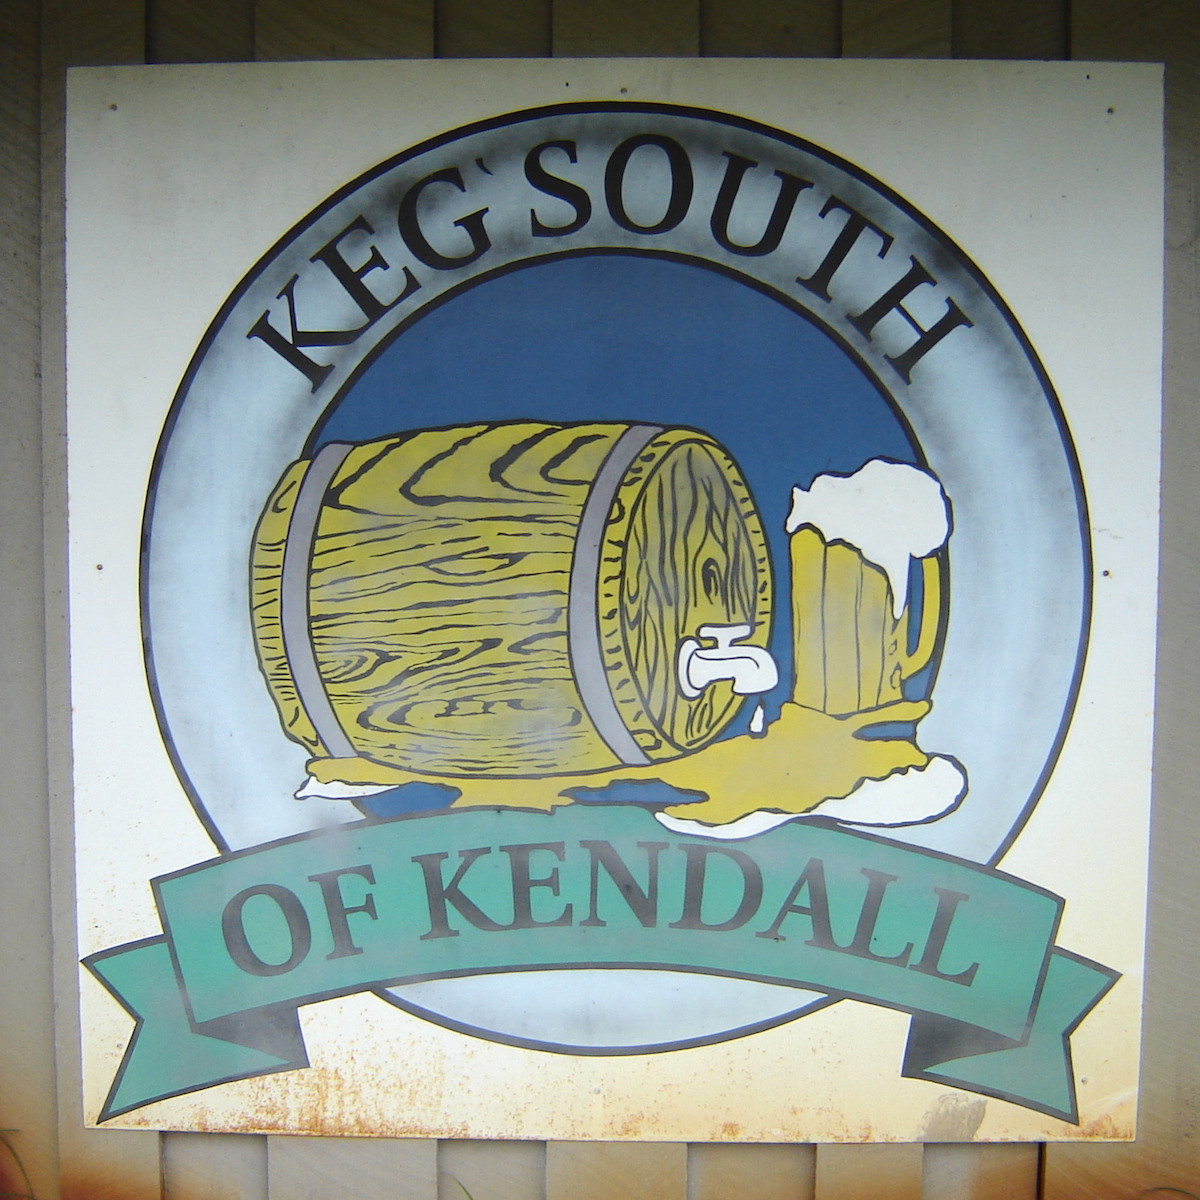 Keg South of Kendall near Tamiami Airport